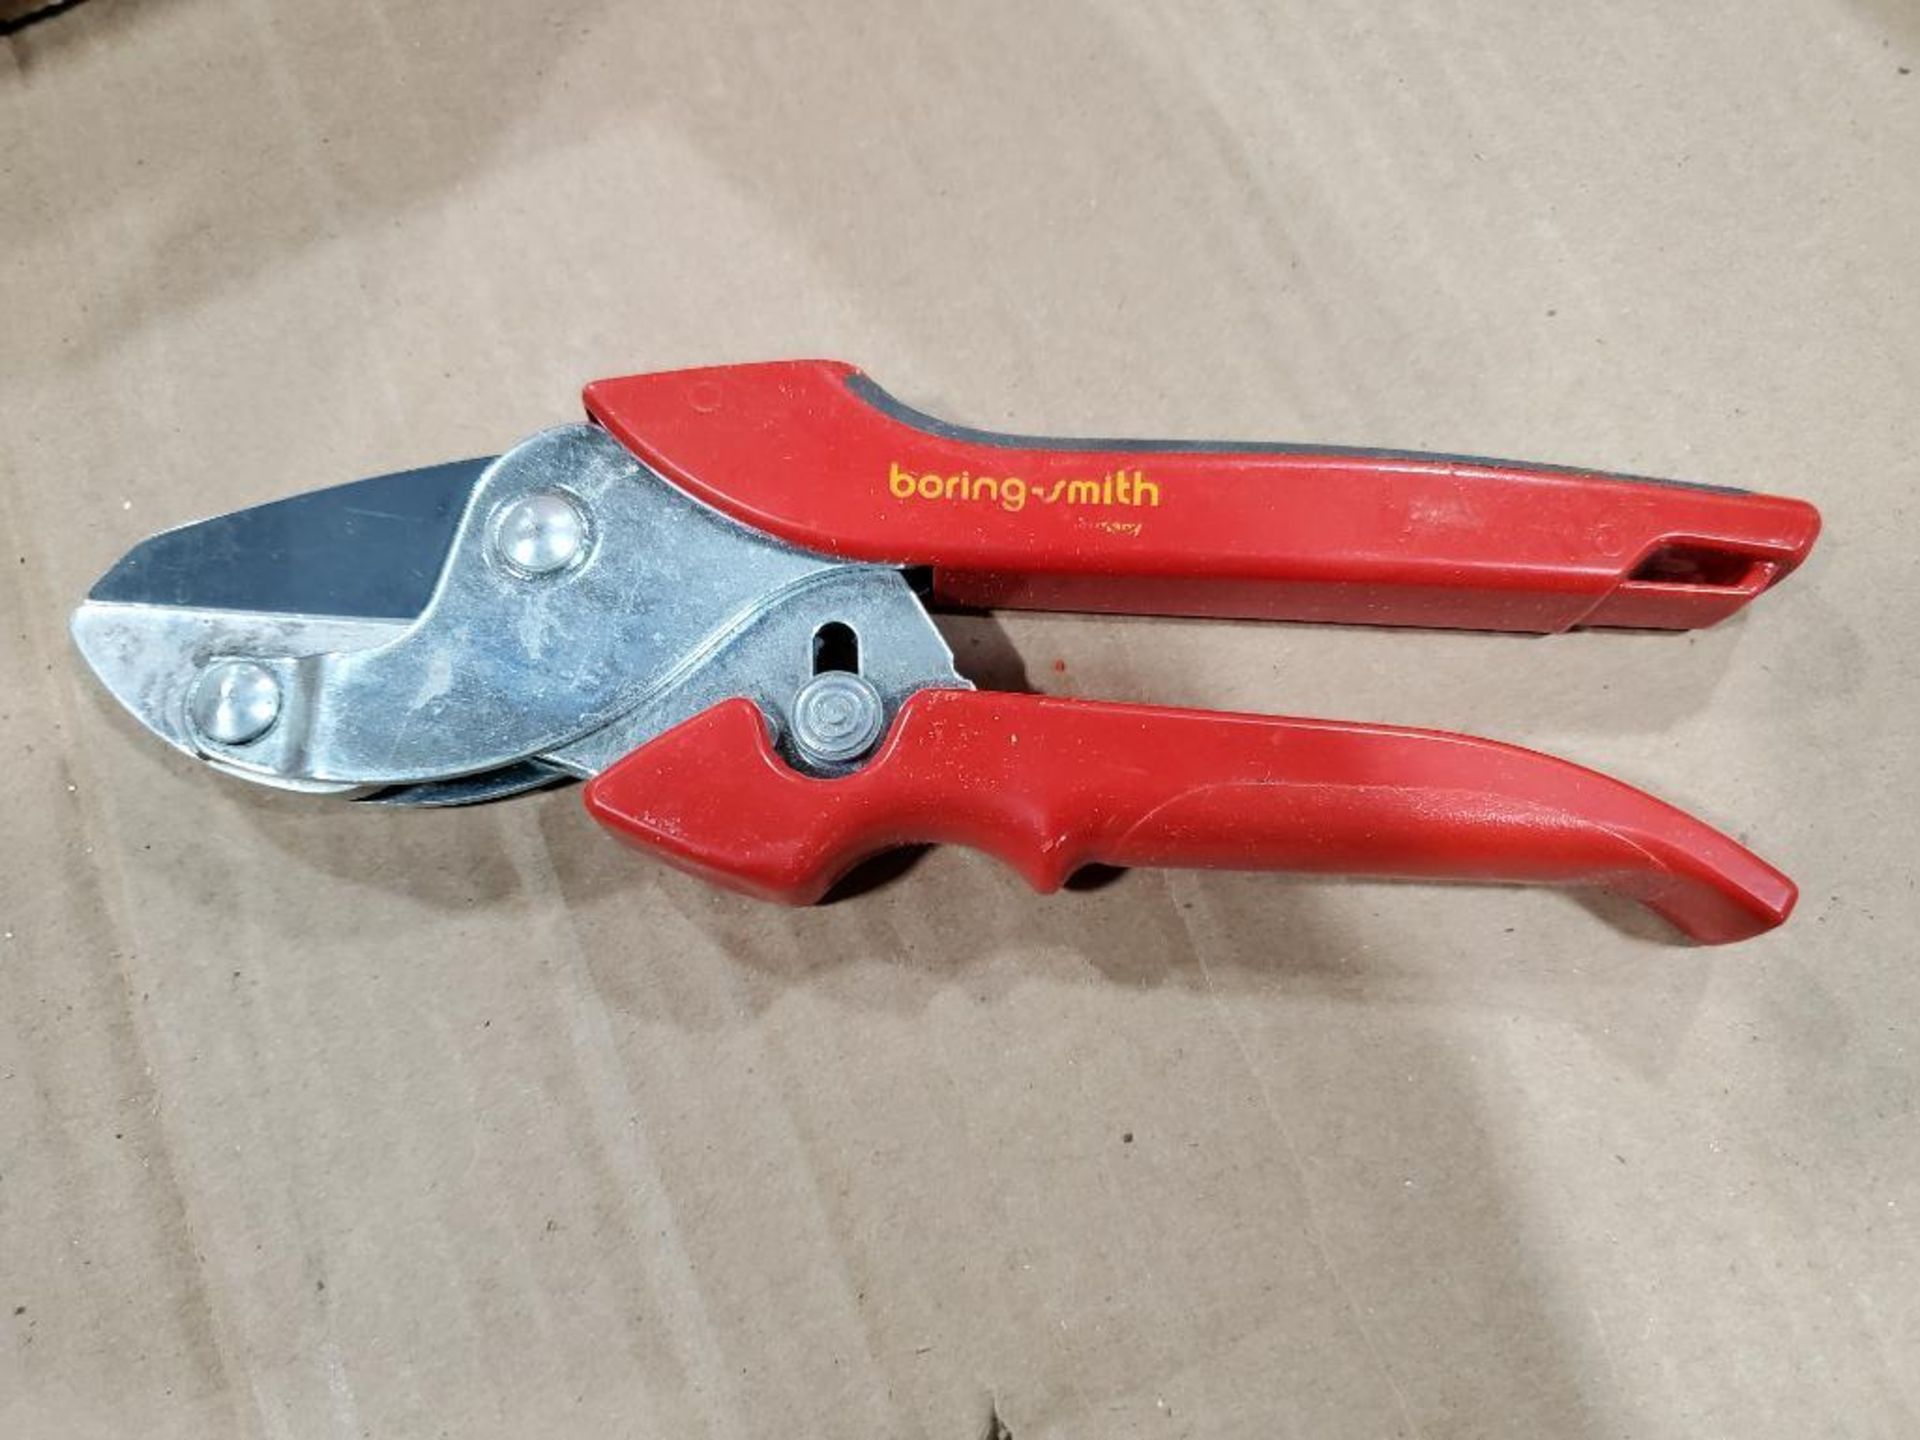 Qty 25 - Boring-Smith anvil pruner cutter. - Image 3 of 3